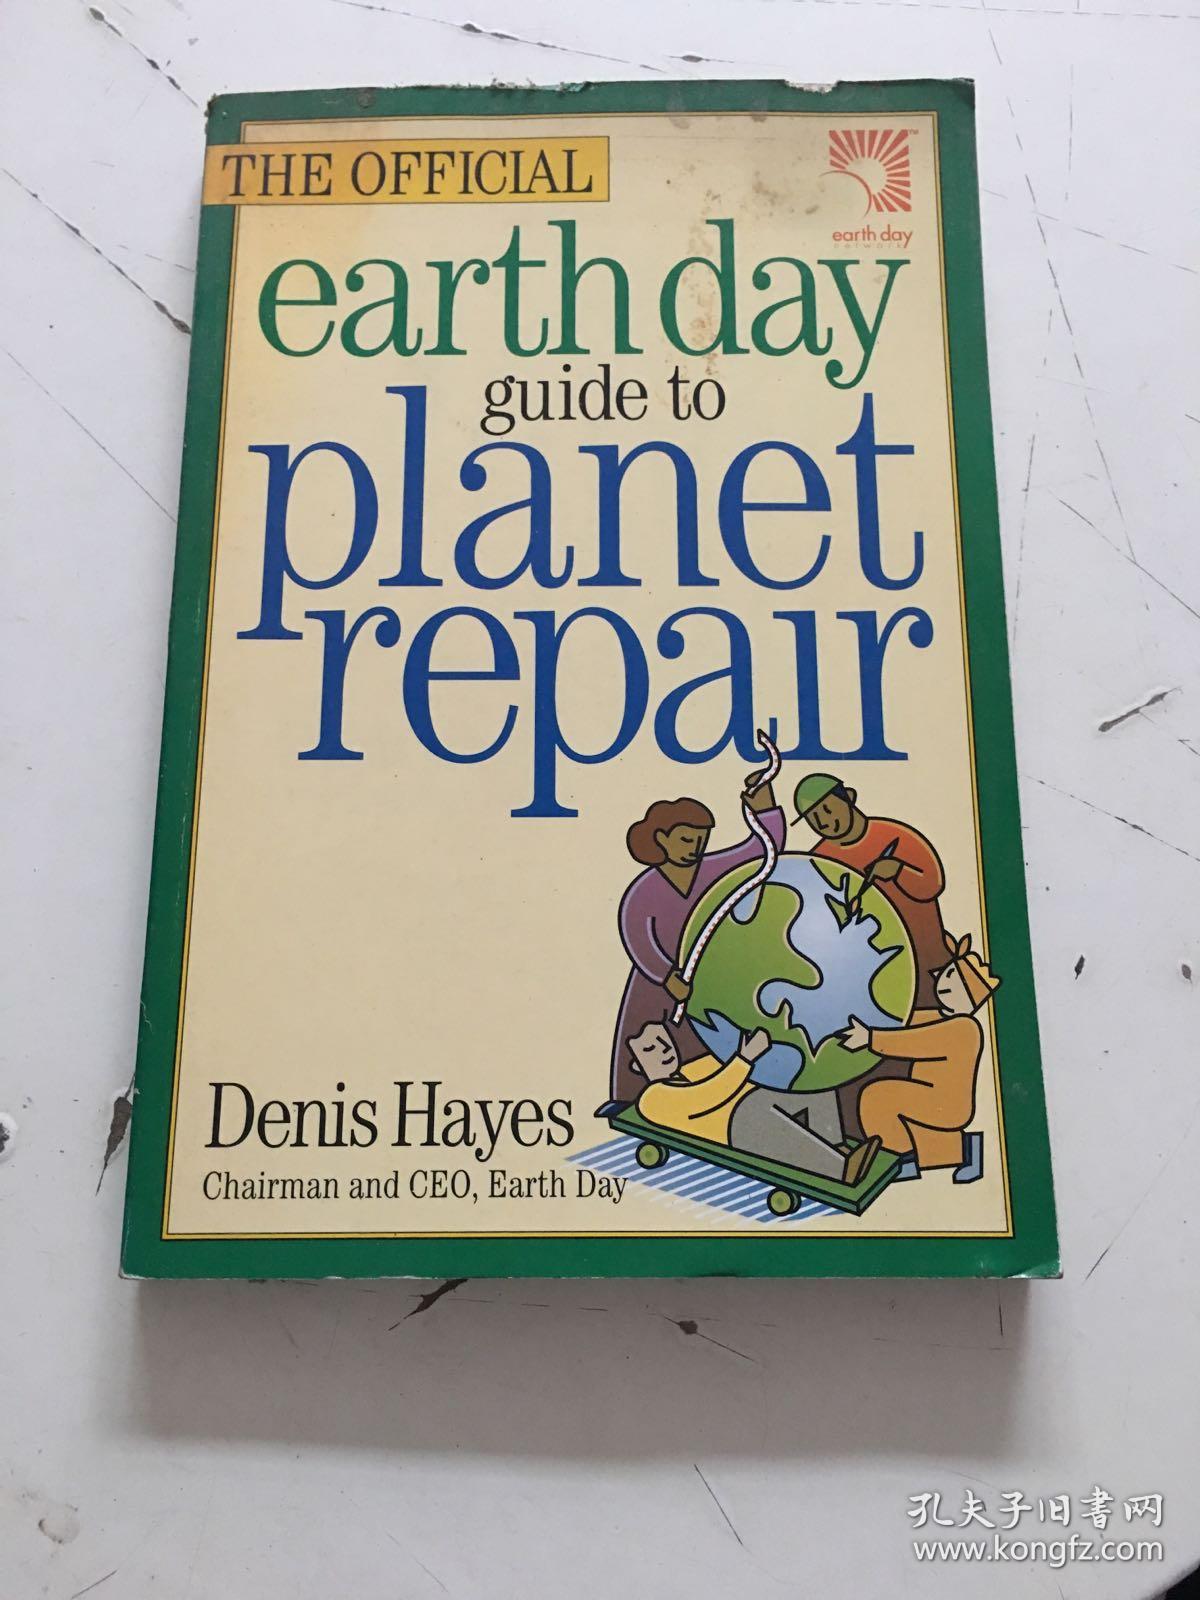 The Official Earth Day Guide to Planet Repair 书上有污渍，低价出售